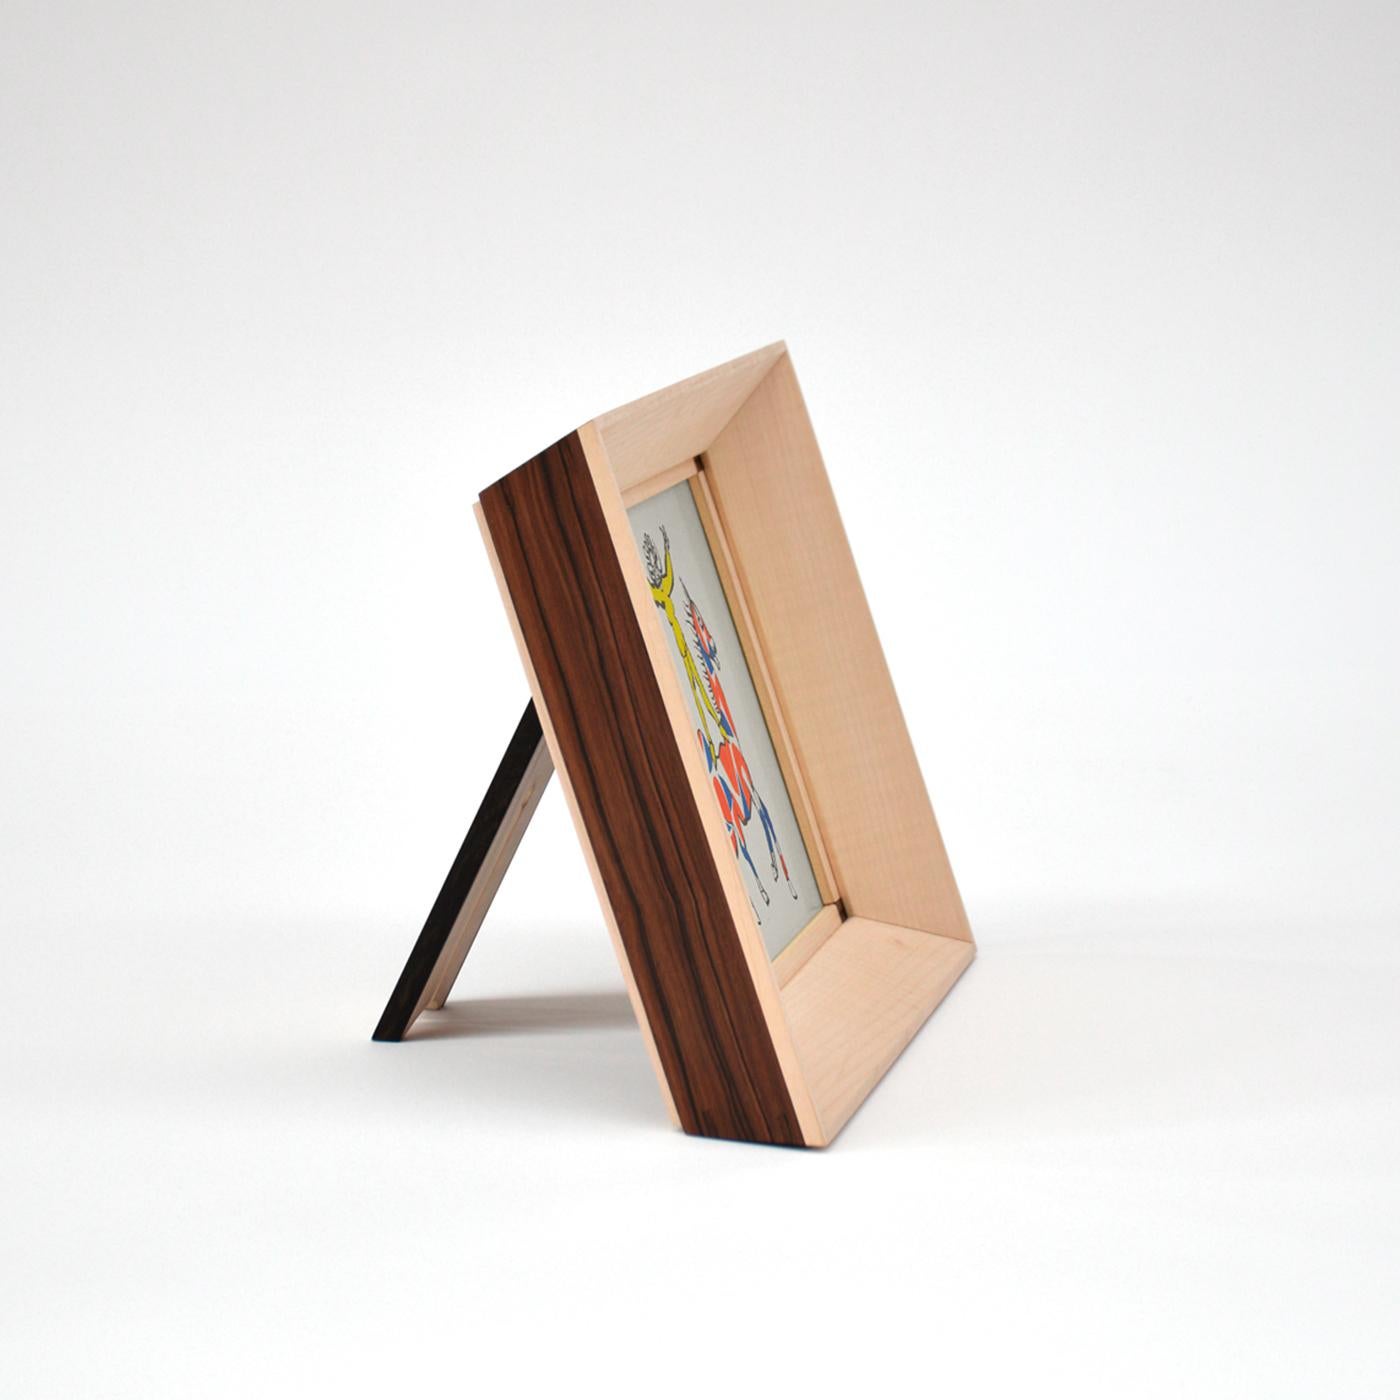 This square picture frame will lend class and sophistication to any room while displaying cherished memories of momentous occasions. Handcrafted of ebony and maple, it sports simple lines enriched by the contrasting hues of the two woods. The